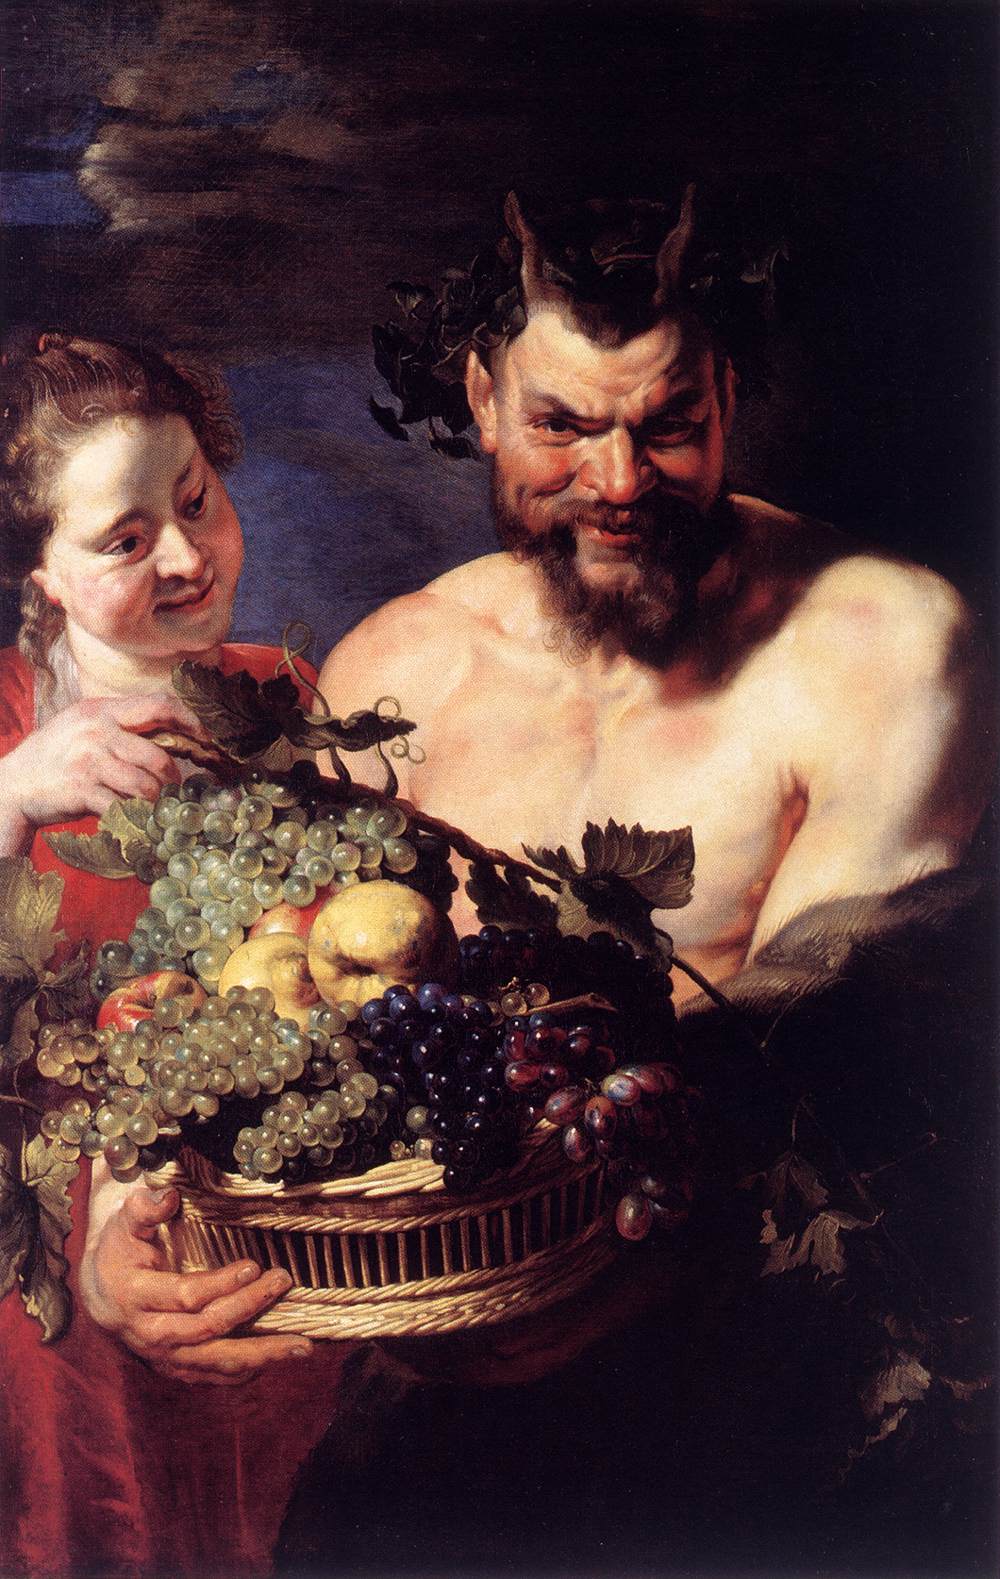 Satyr and Girl by Peter Paul Rubens Reproduction Oil Painting on Canvas